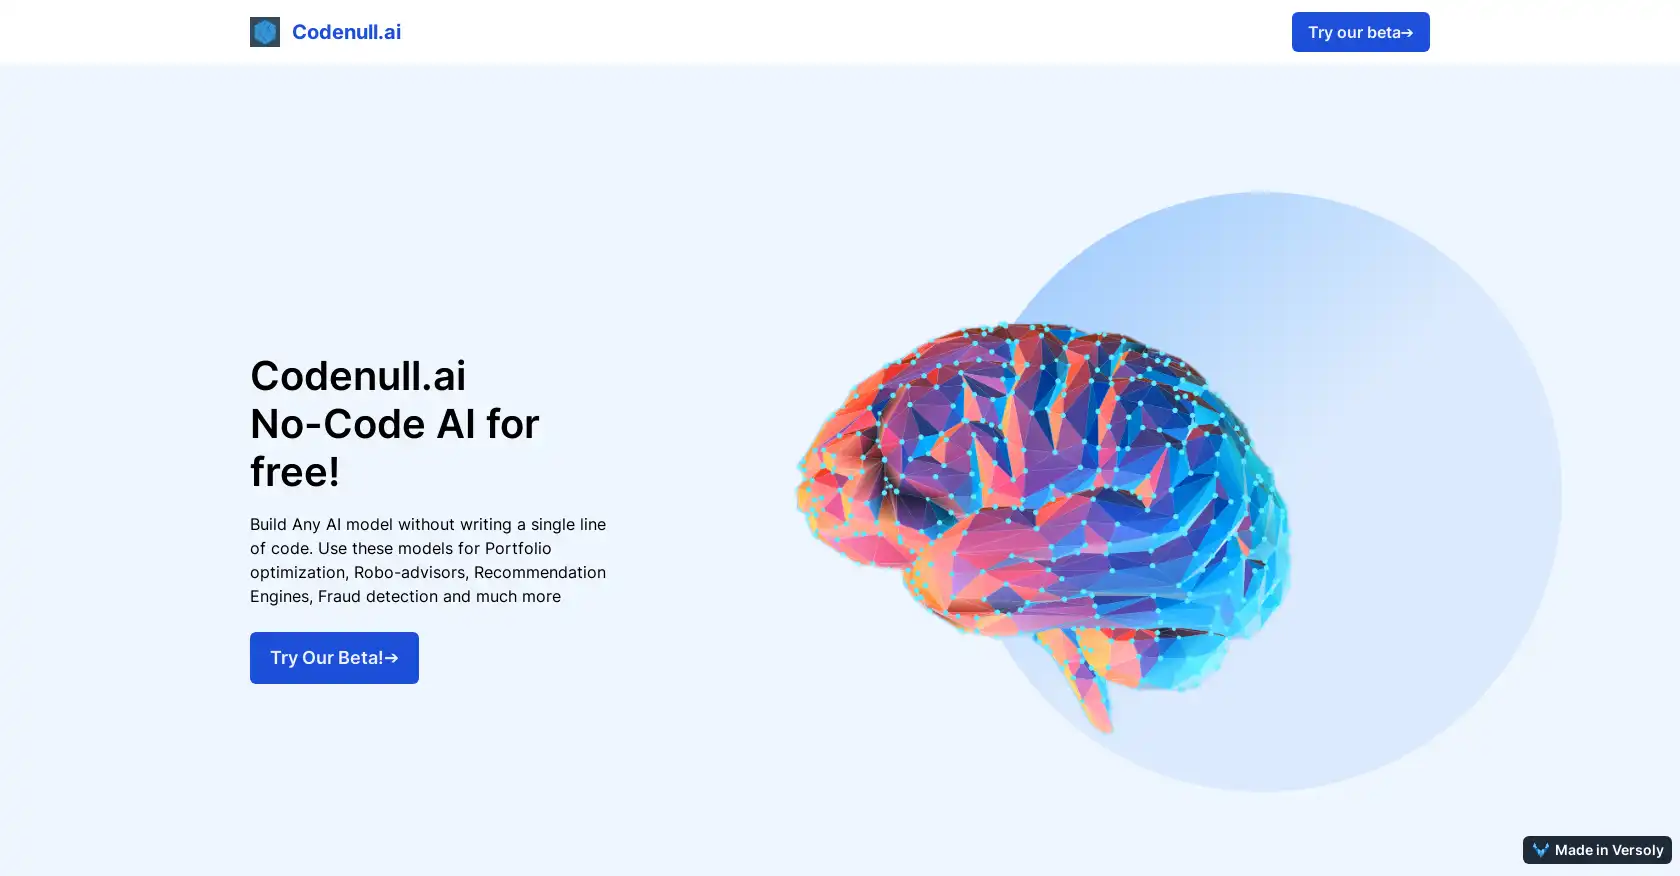 Codenull.ai - AI tool for No-code, Business solutions, Personalized recommendations, Training process